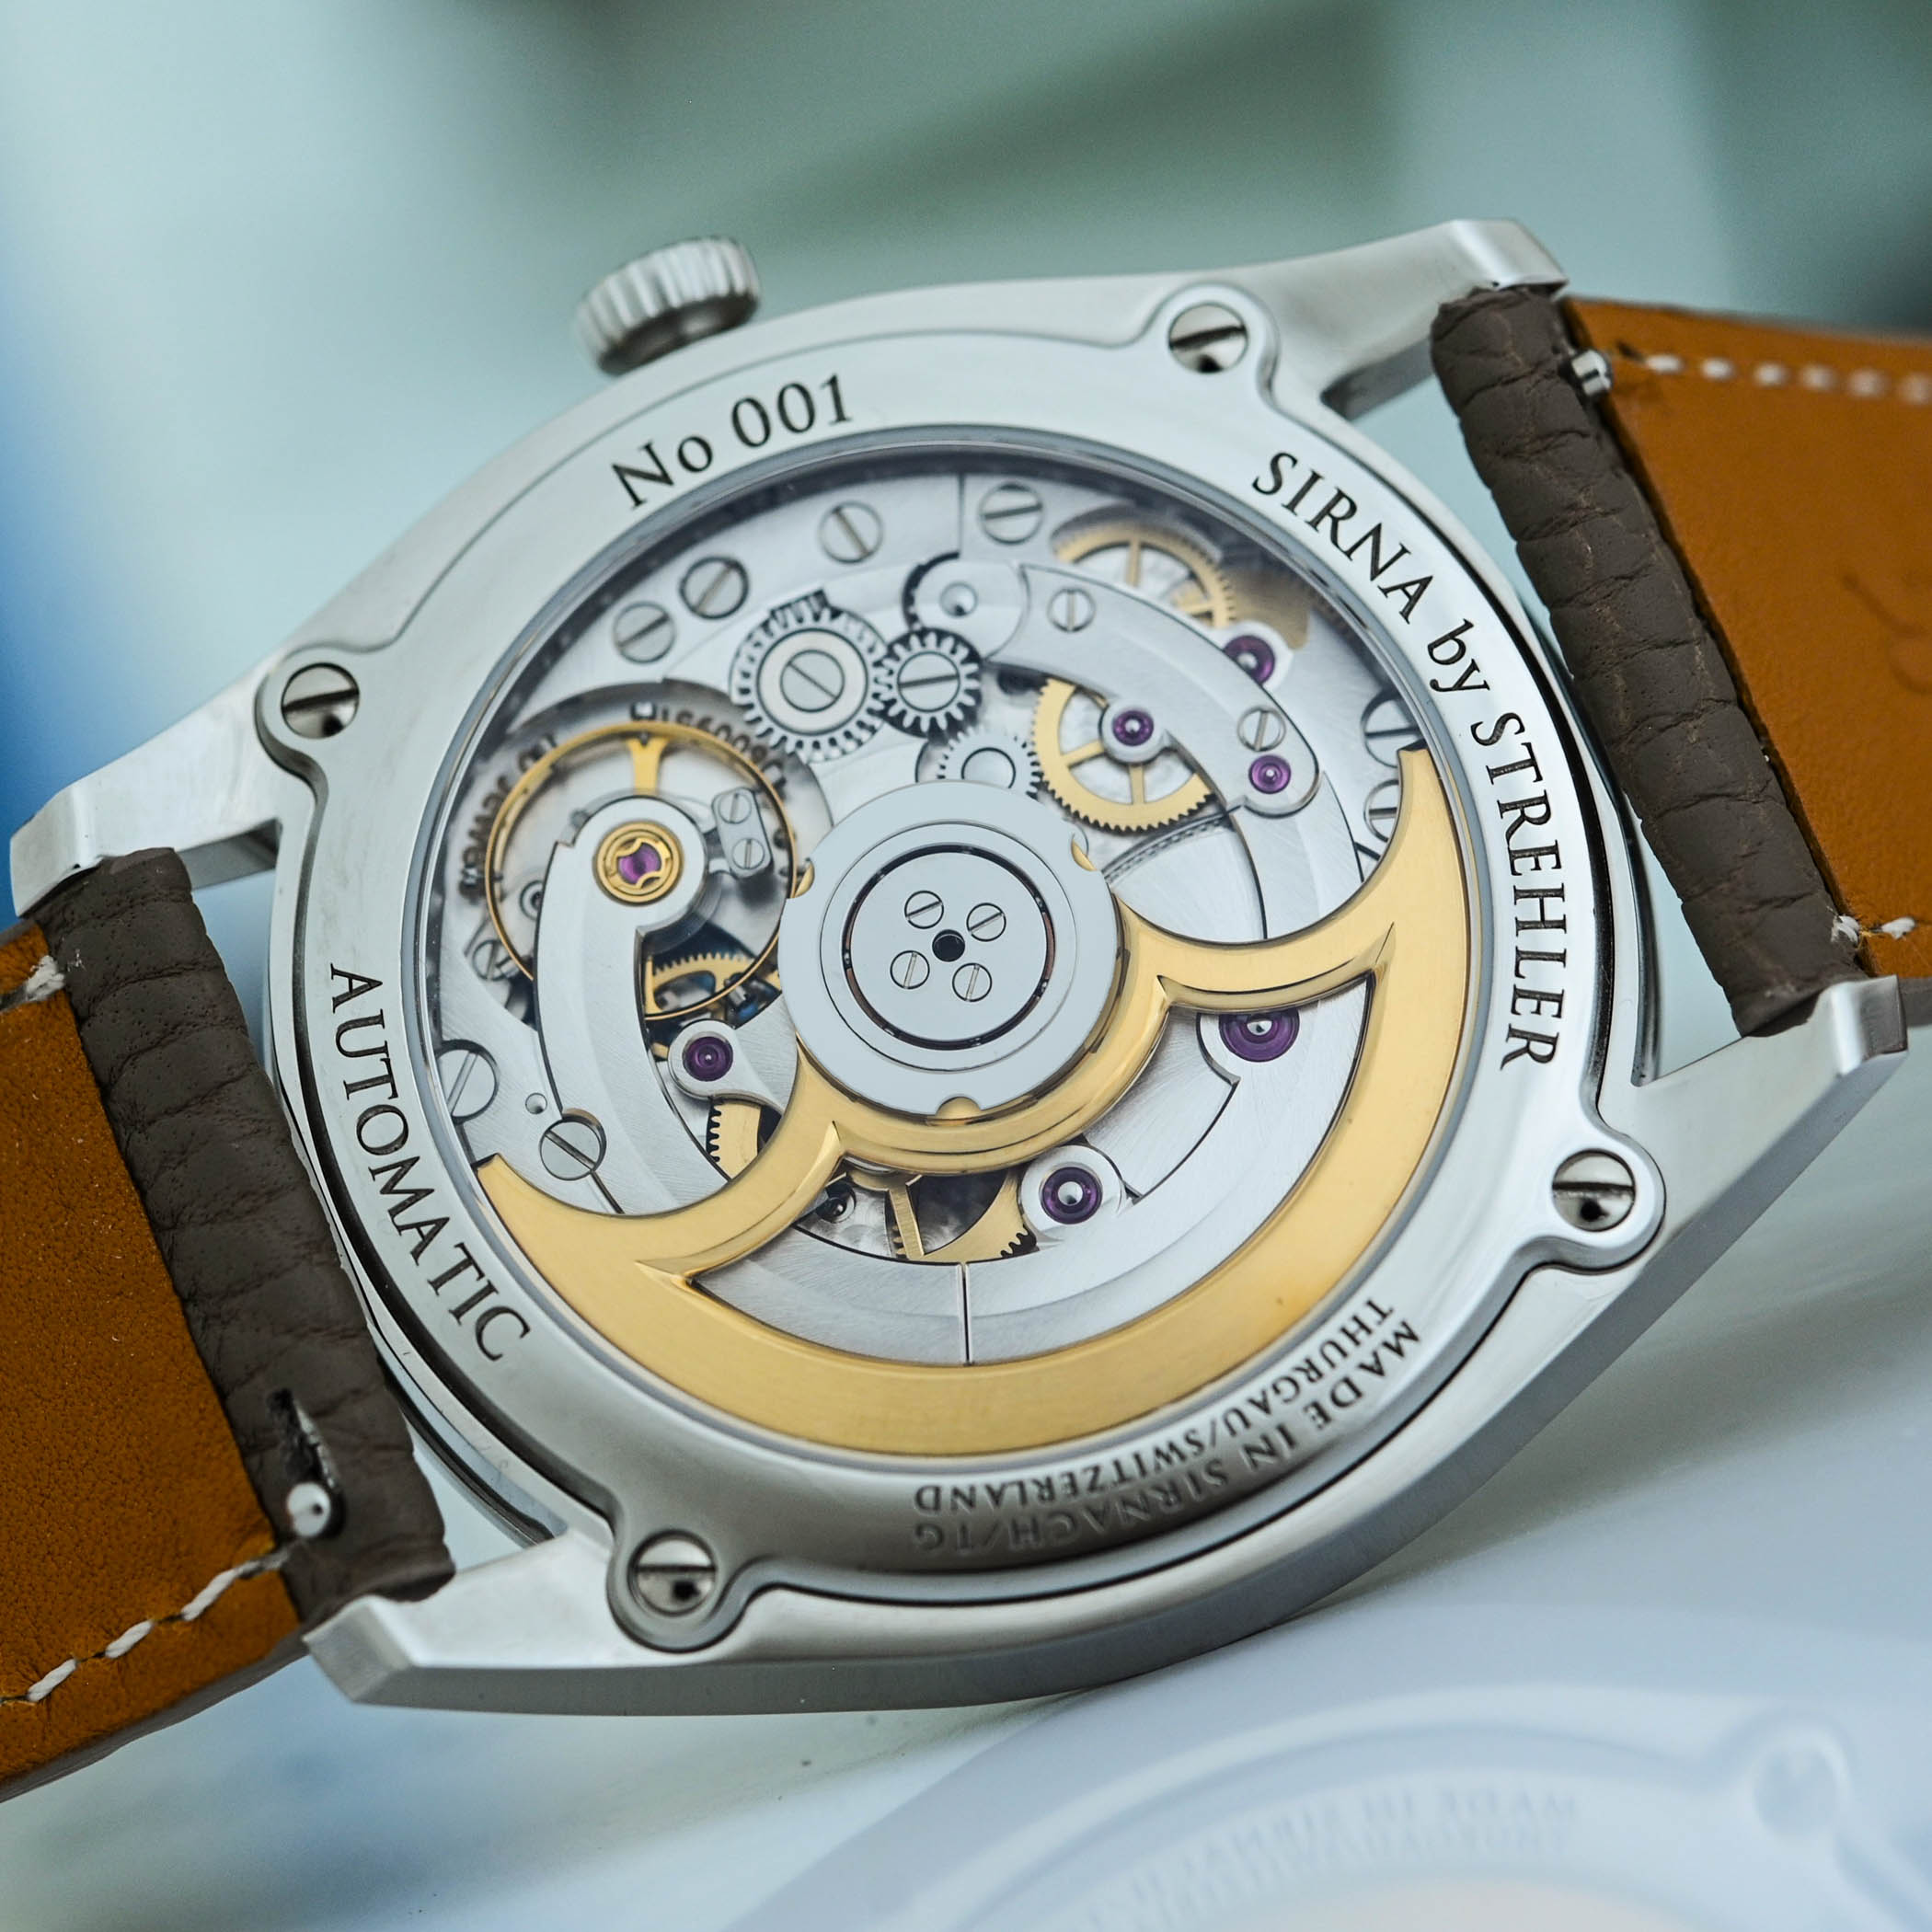 Strehler Sirna - New Brand and Watch of Andreas Strehler